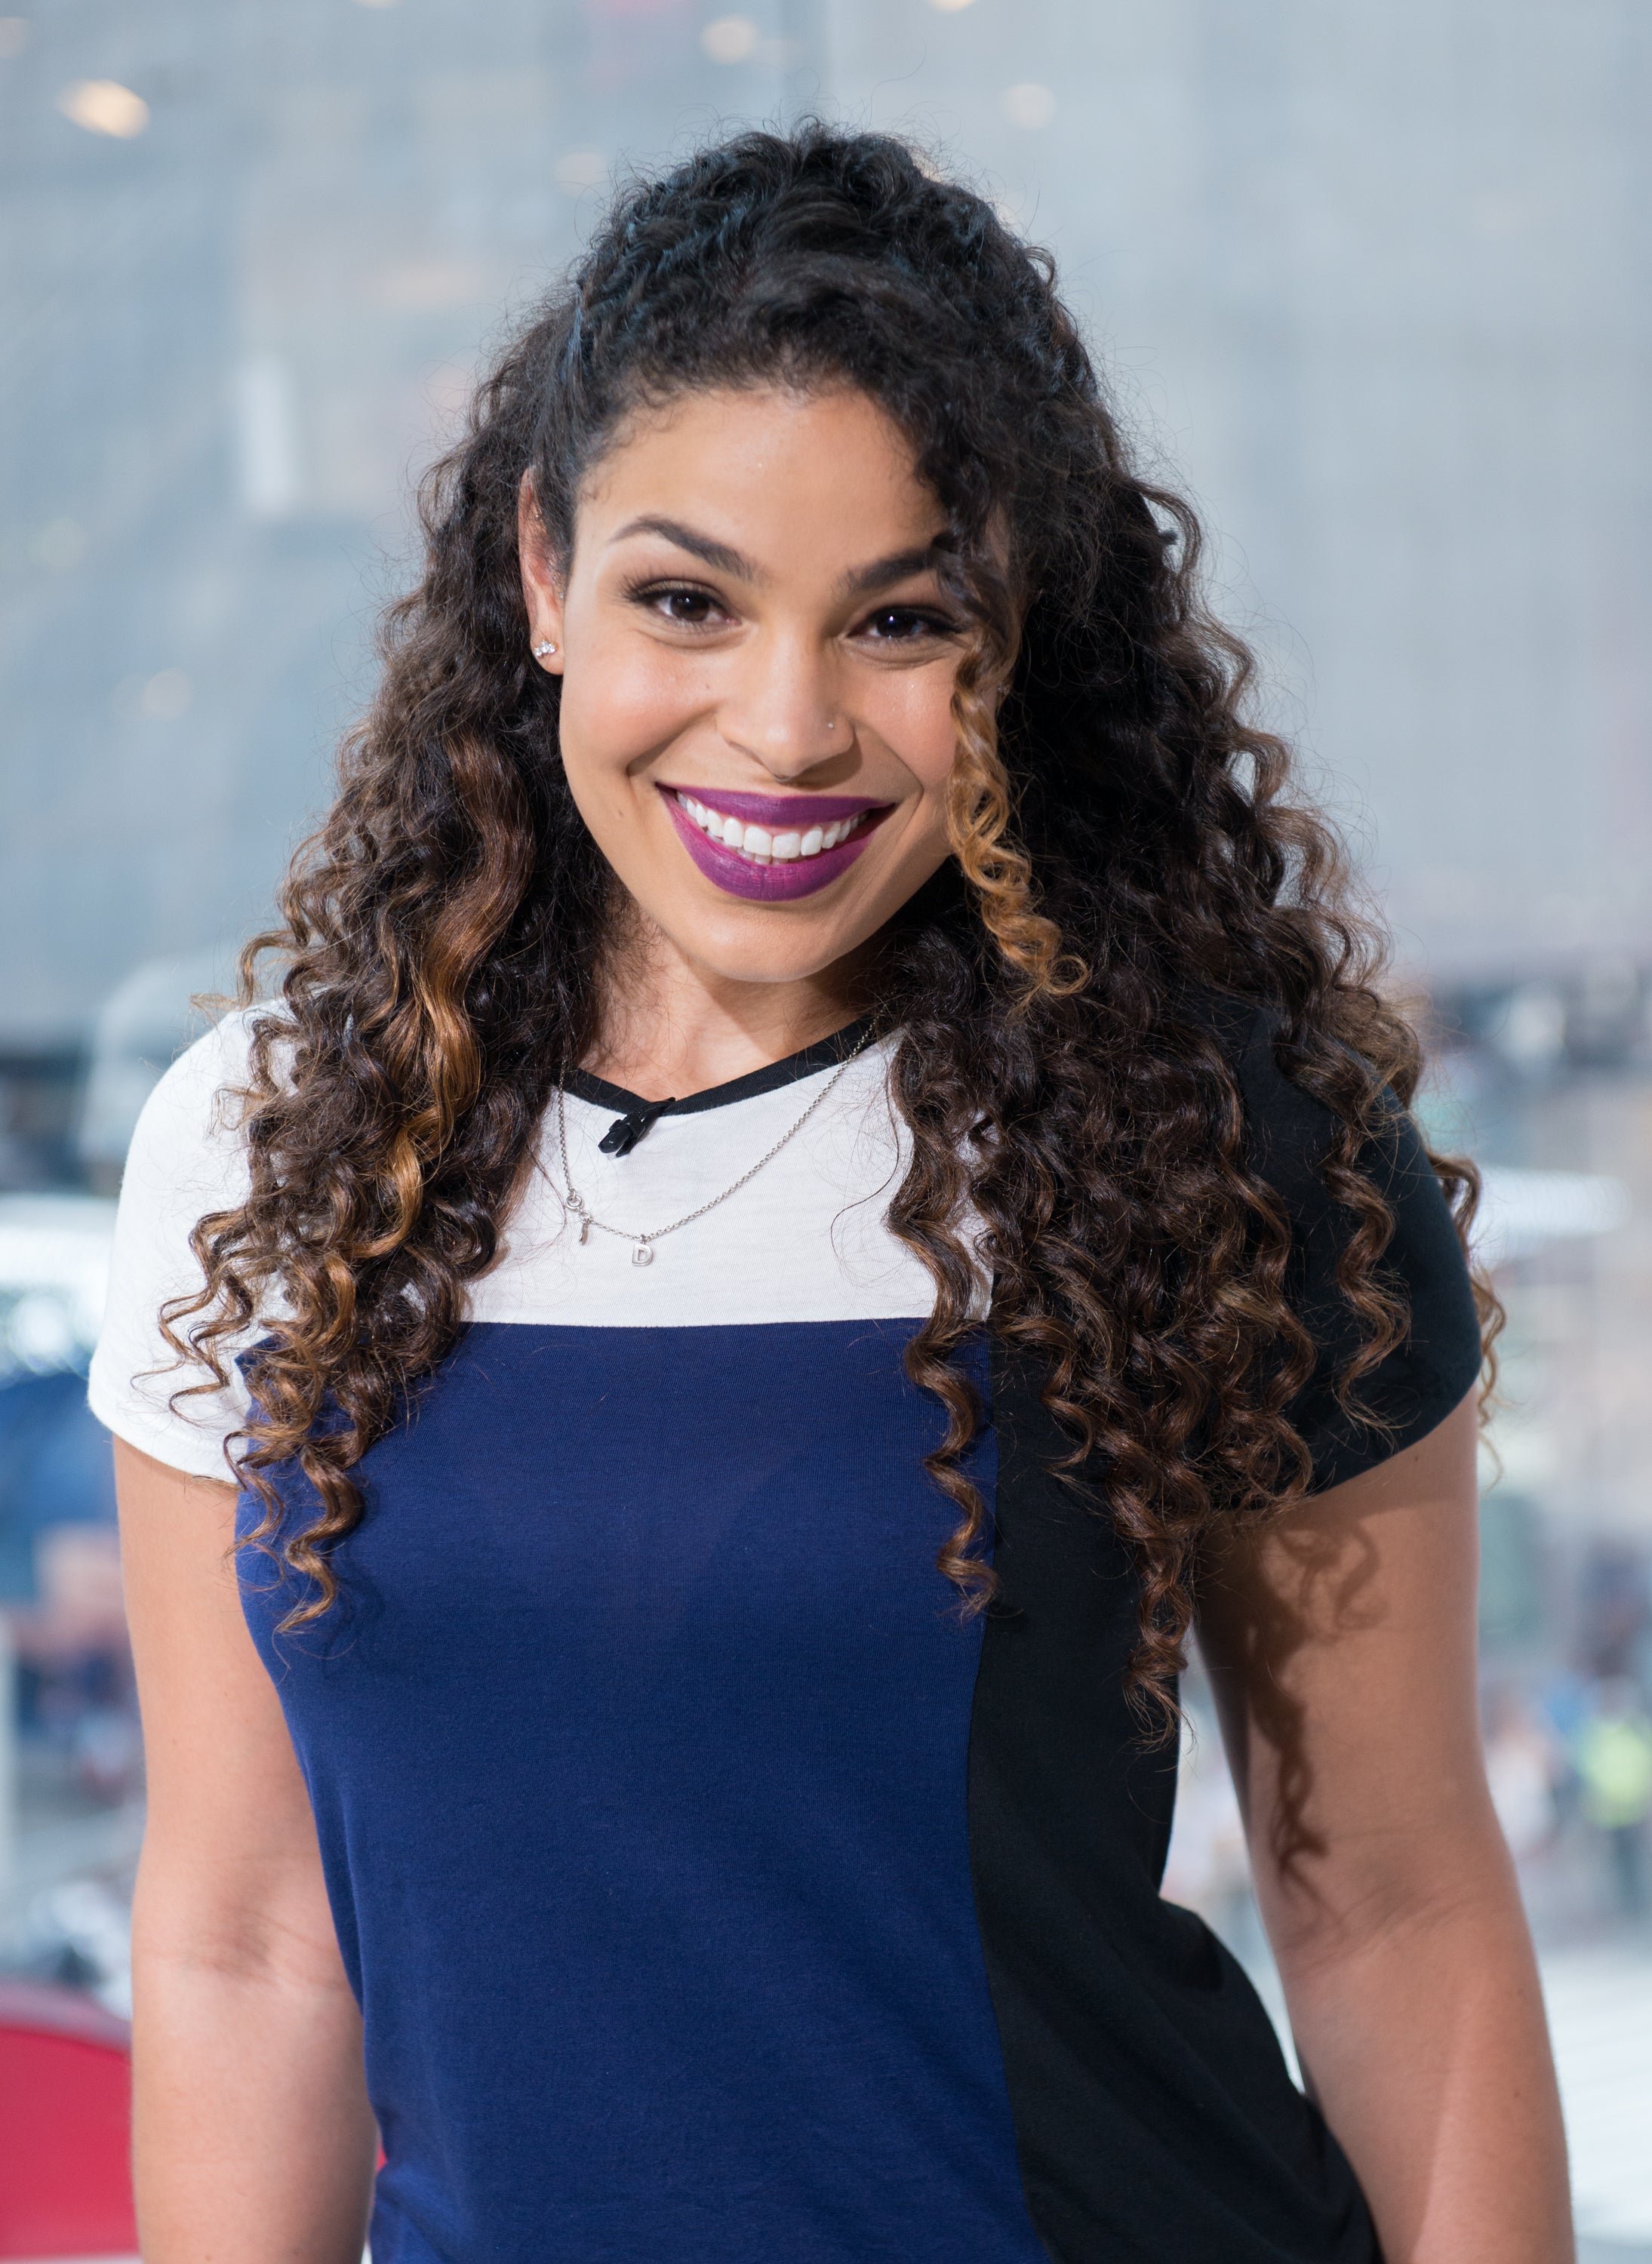 Jordin Sparks Makes It Red Carpet Official With Her New Boyfriend
